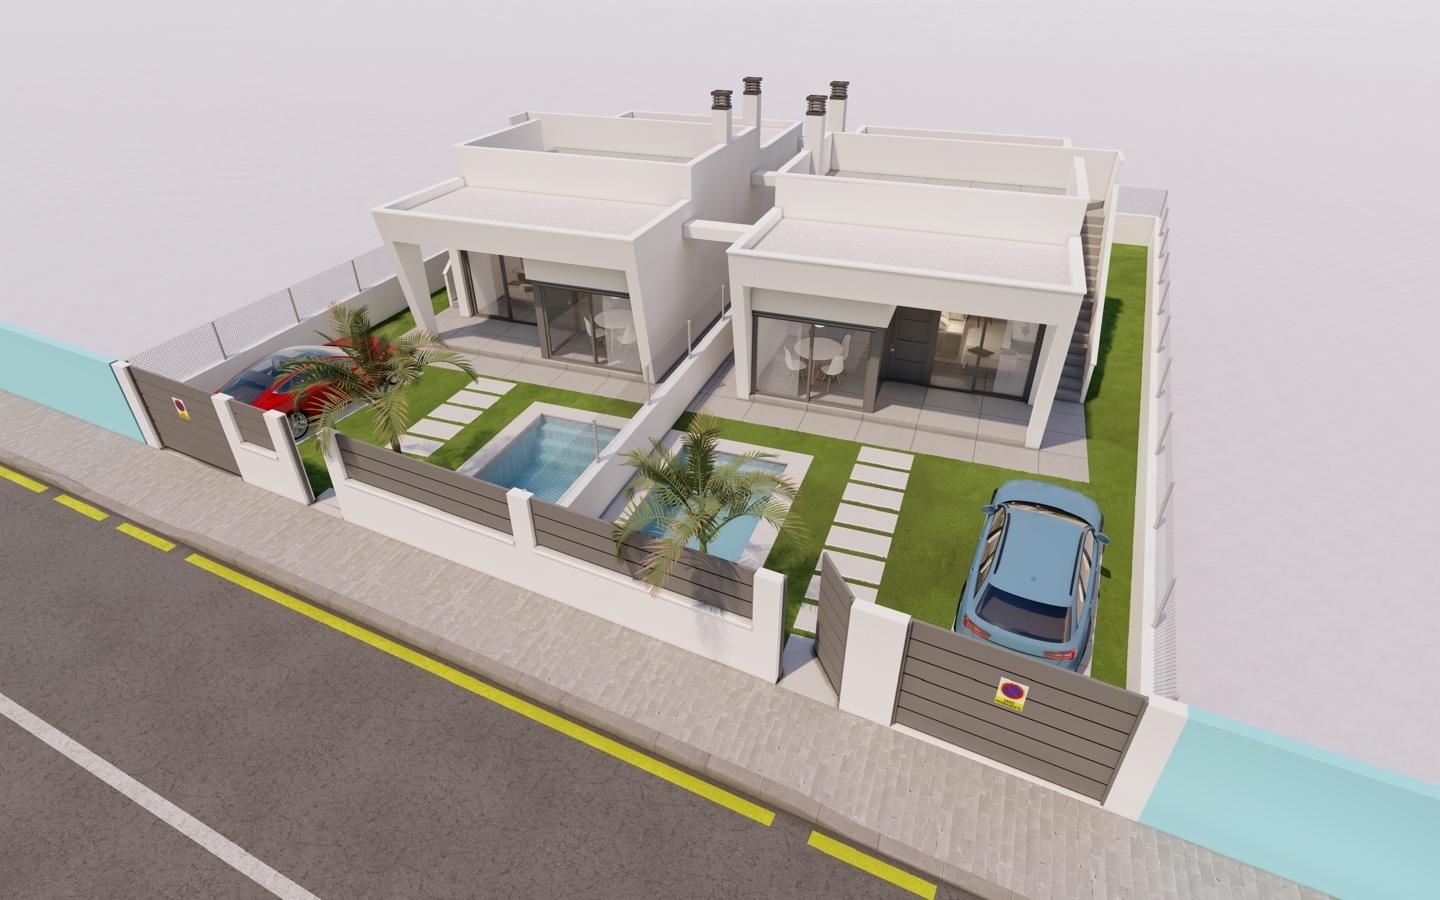 3 Bedroom 2 Bathroom Villa with Pool and Parking in Fortuna